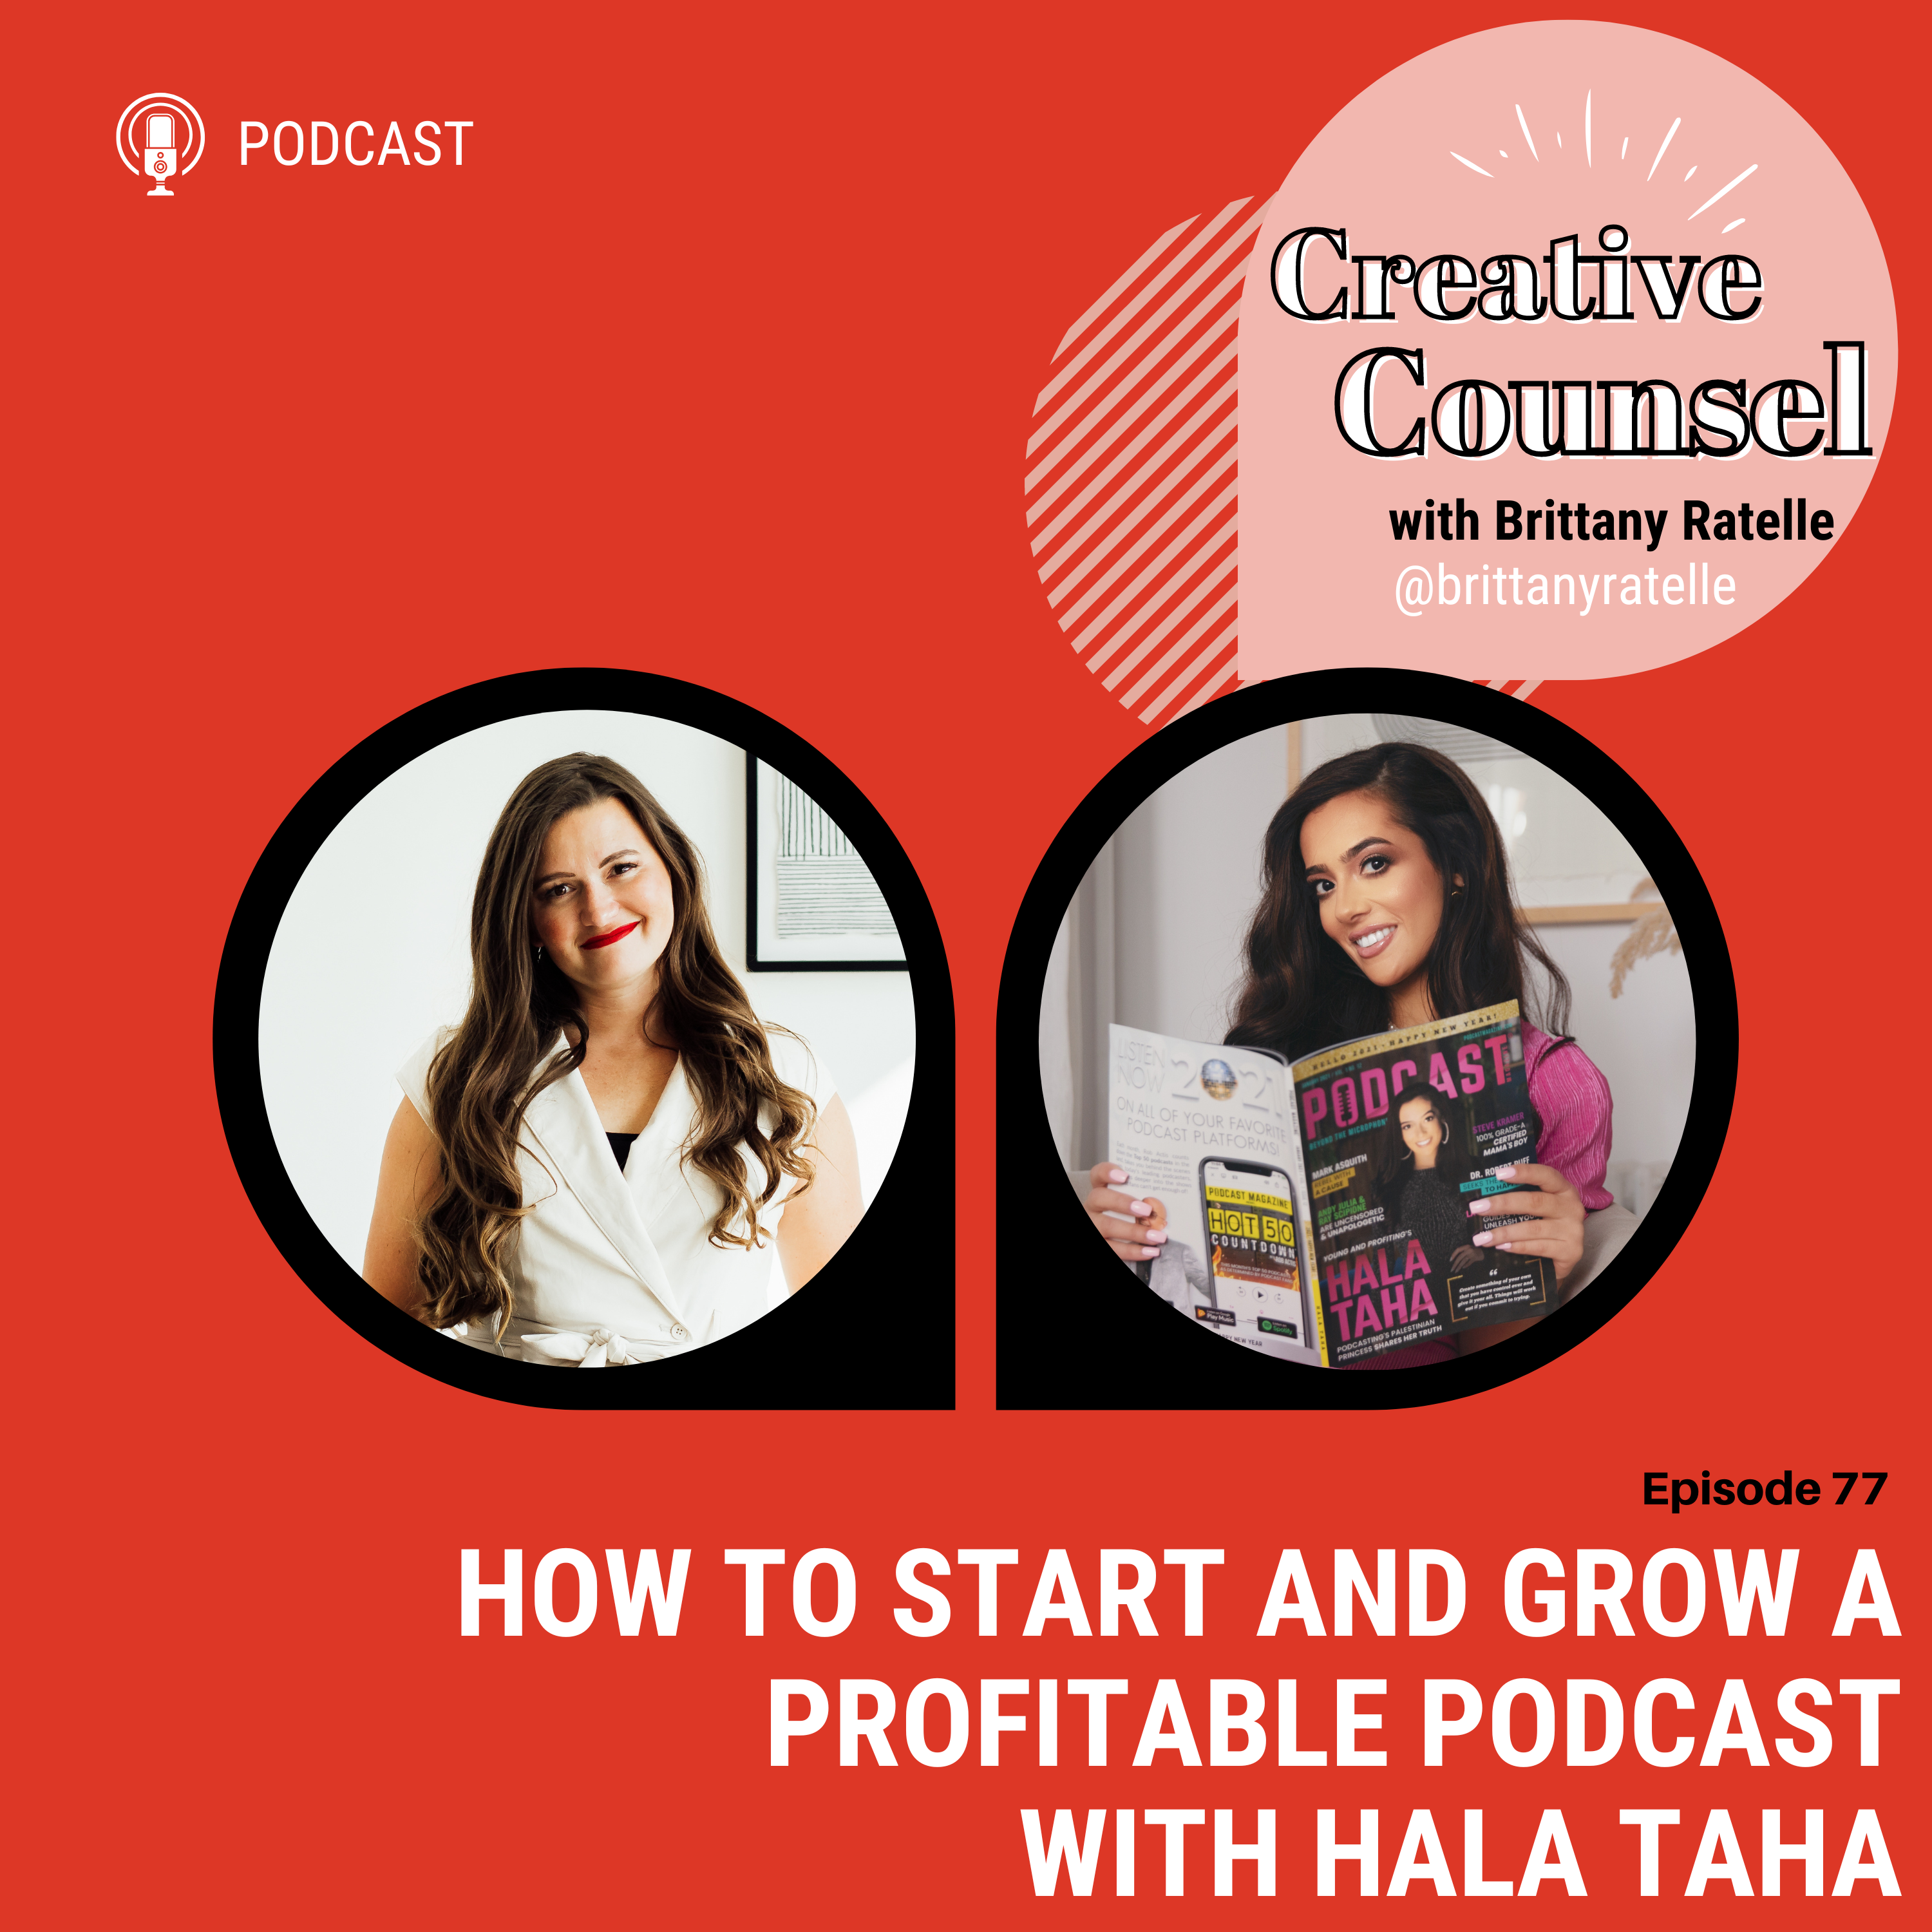 How to start and grow a profitable podcast with Hala Taha